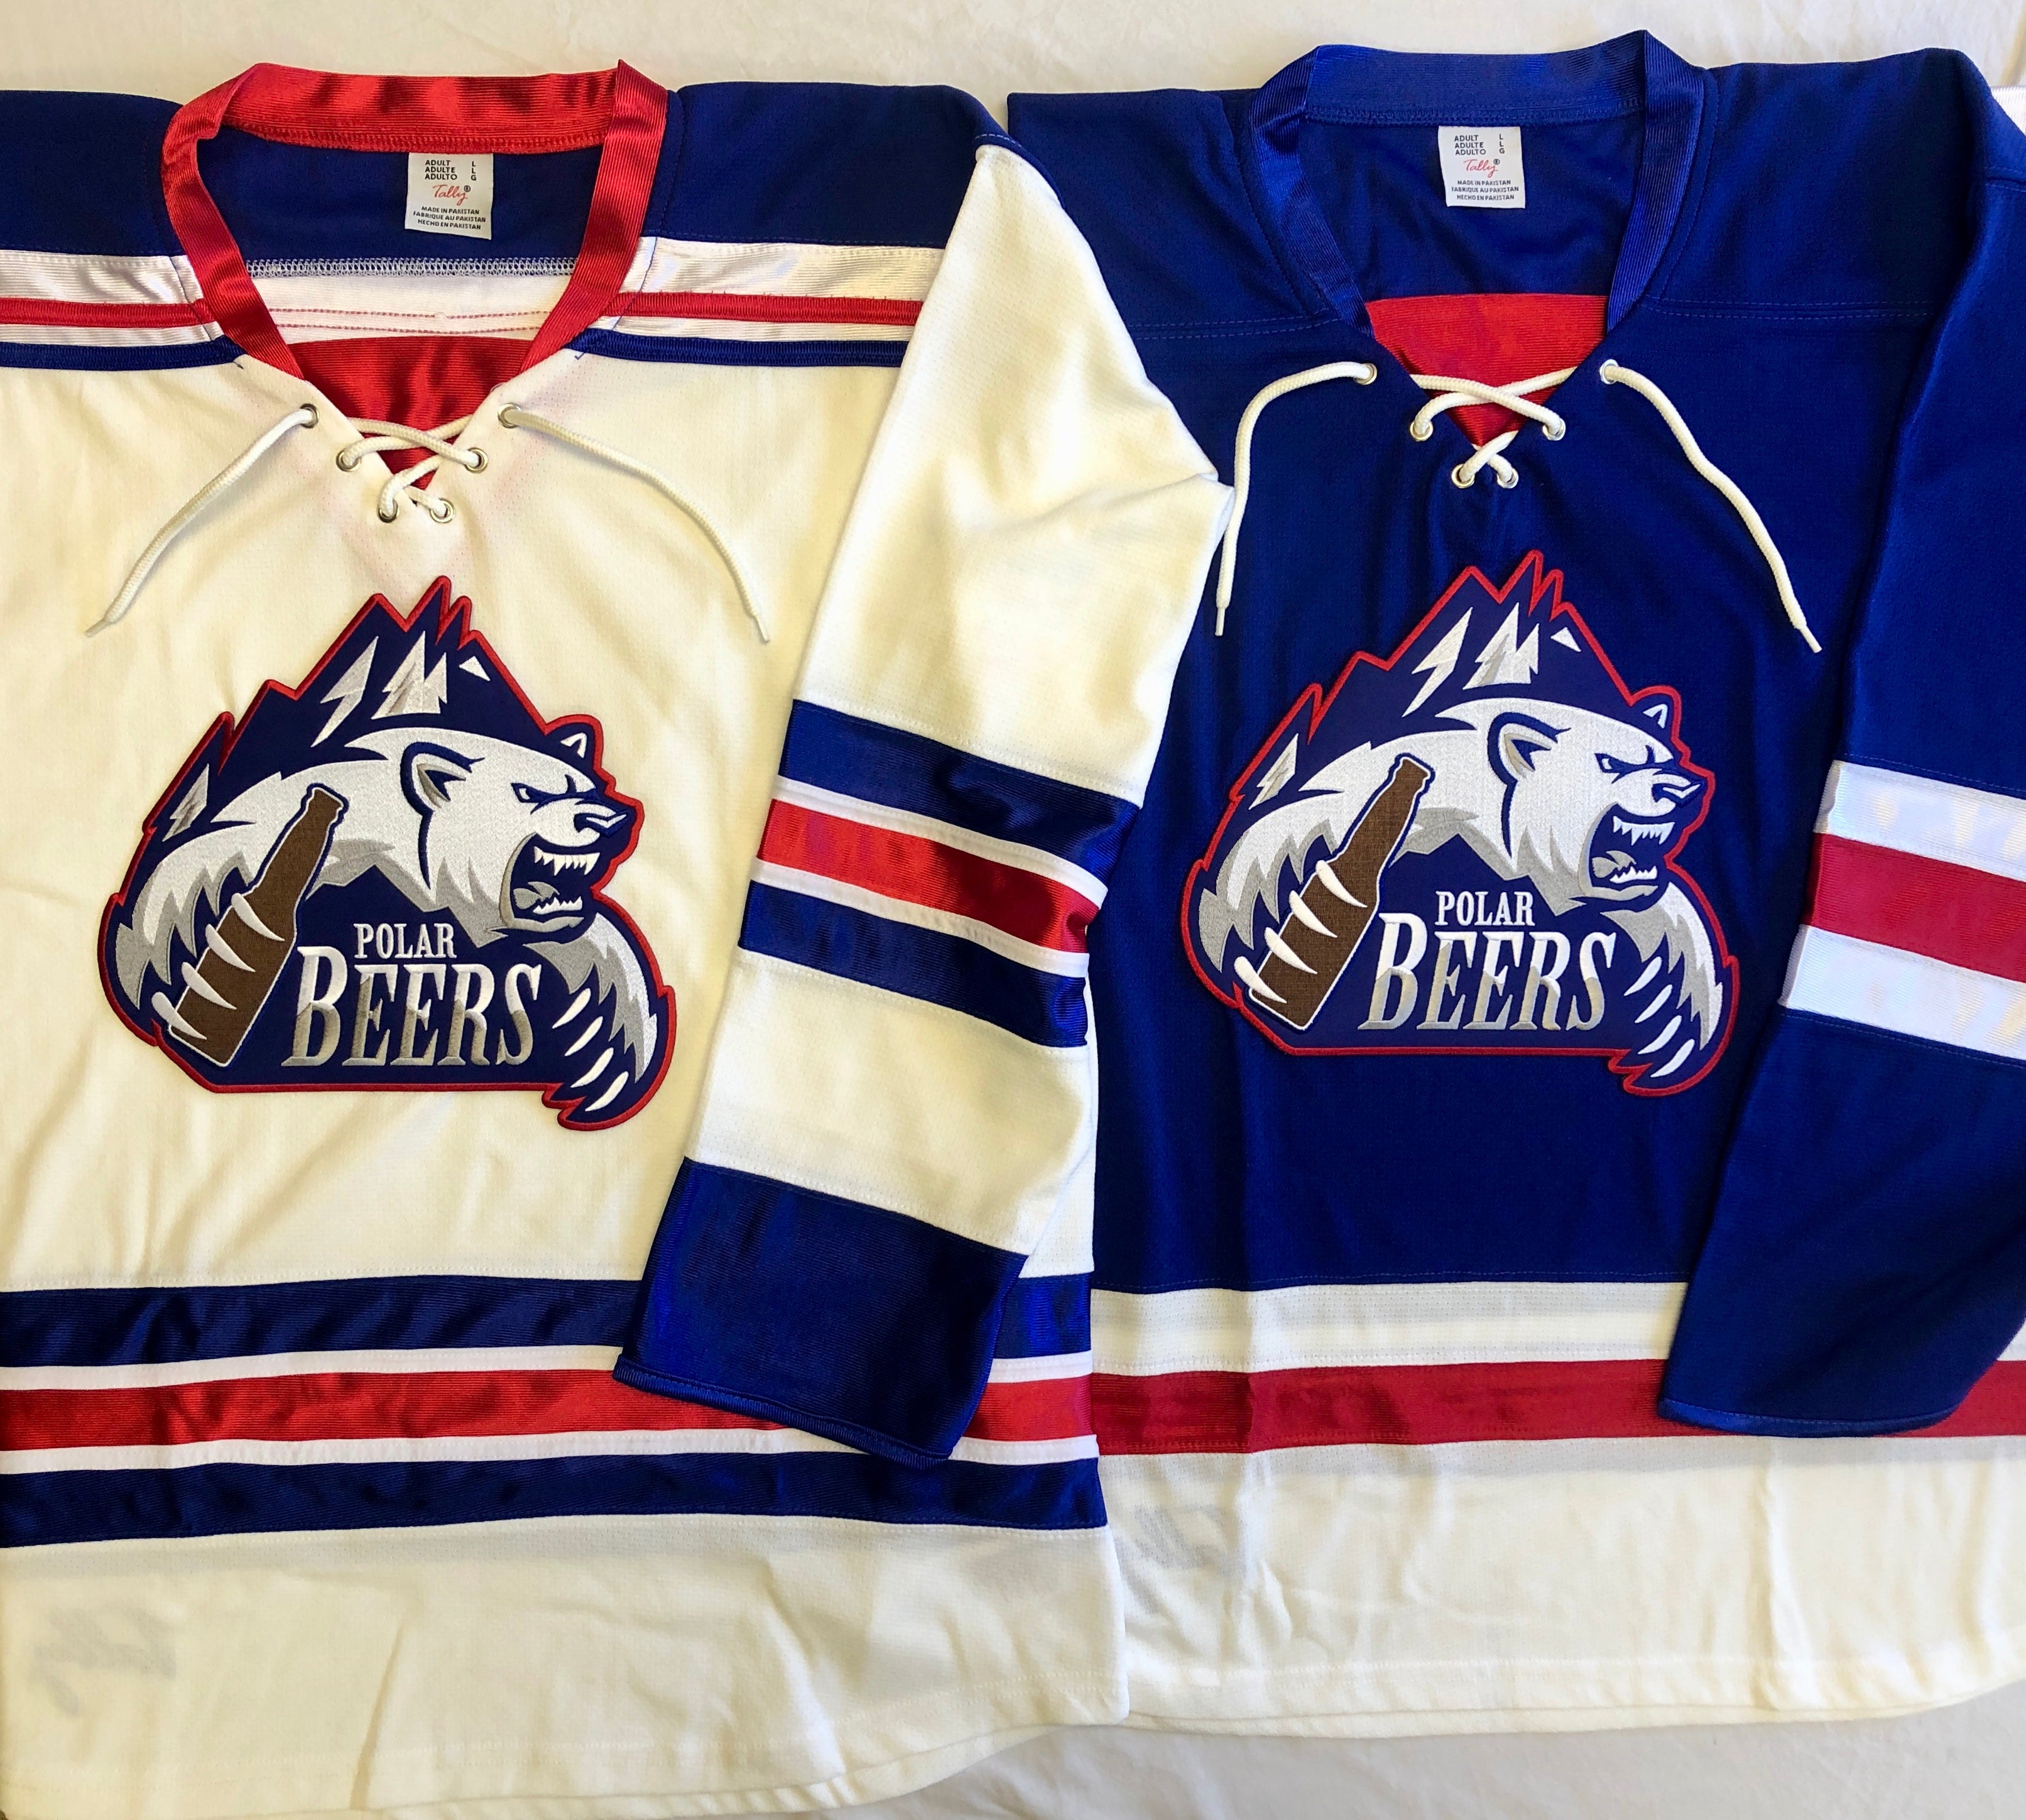 Custom Hockey Jerseys with Purple and White Ale Stars Logo Adult XL / (Number on Back and Sleeves) / White